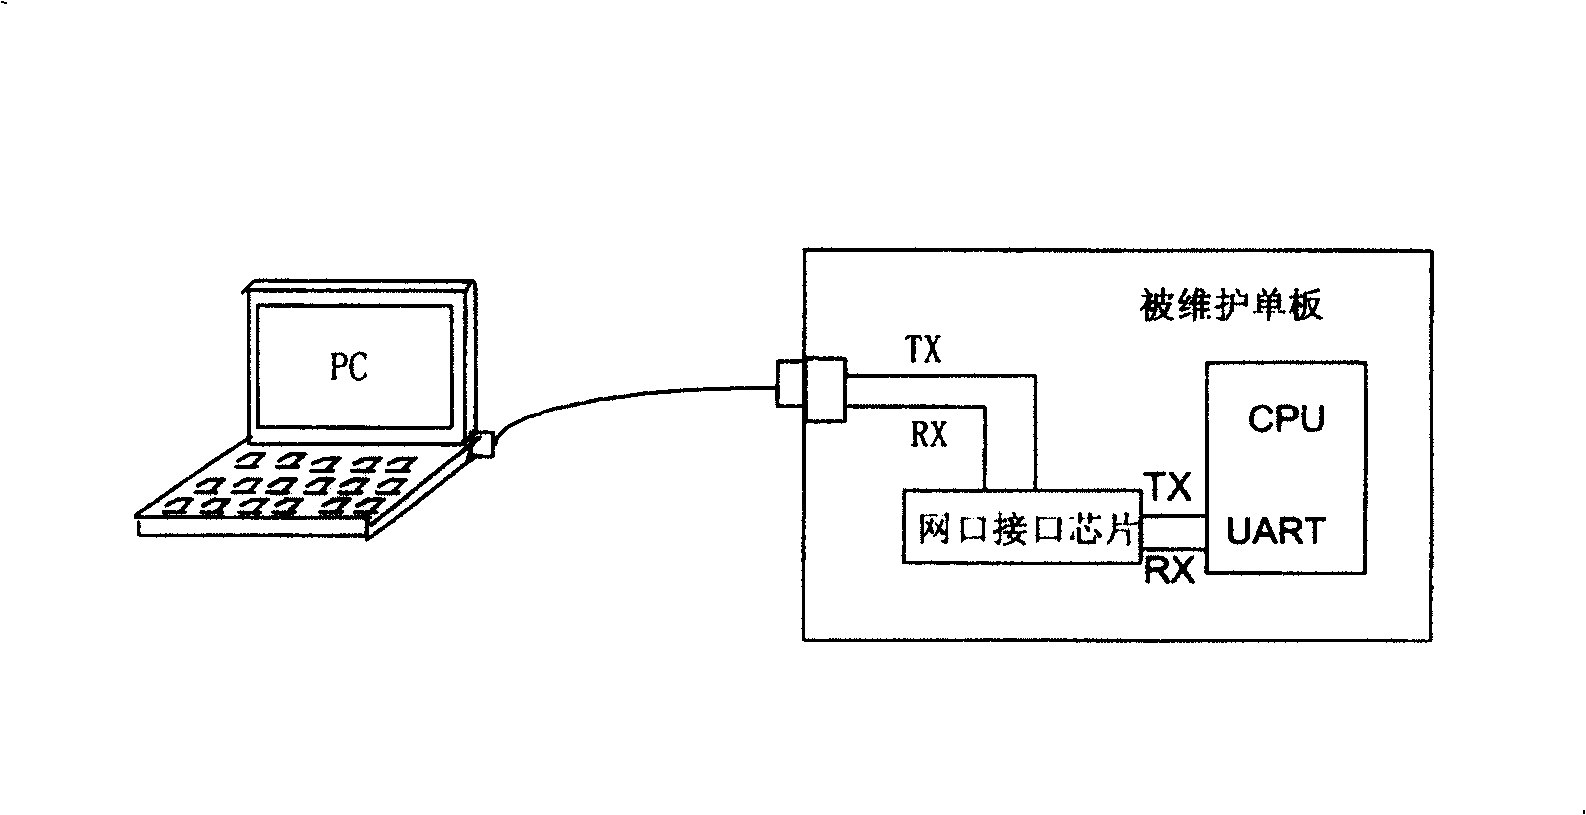 Maintenance device for a communication system and method for transforing maintennance information